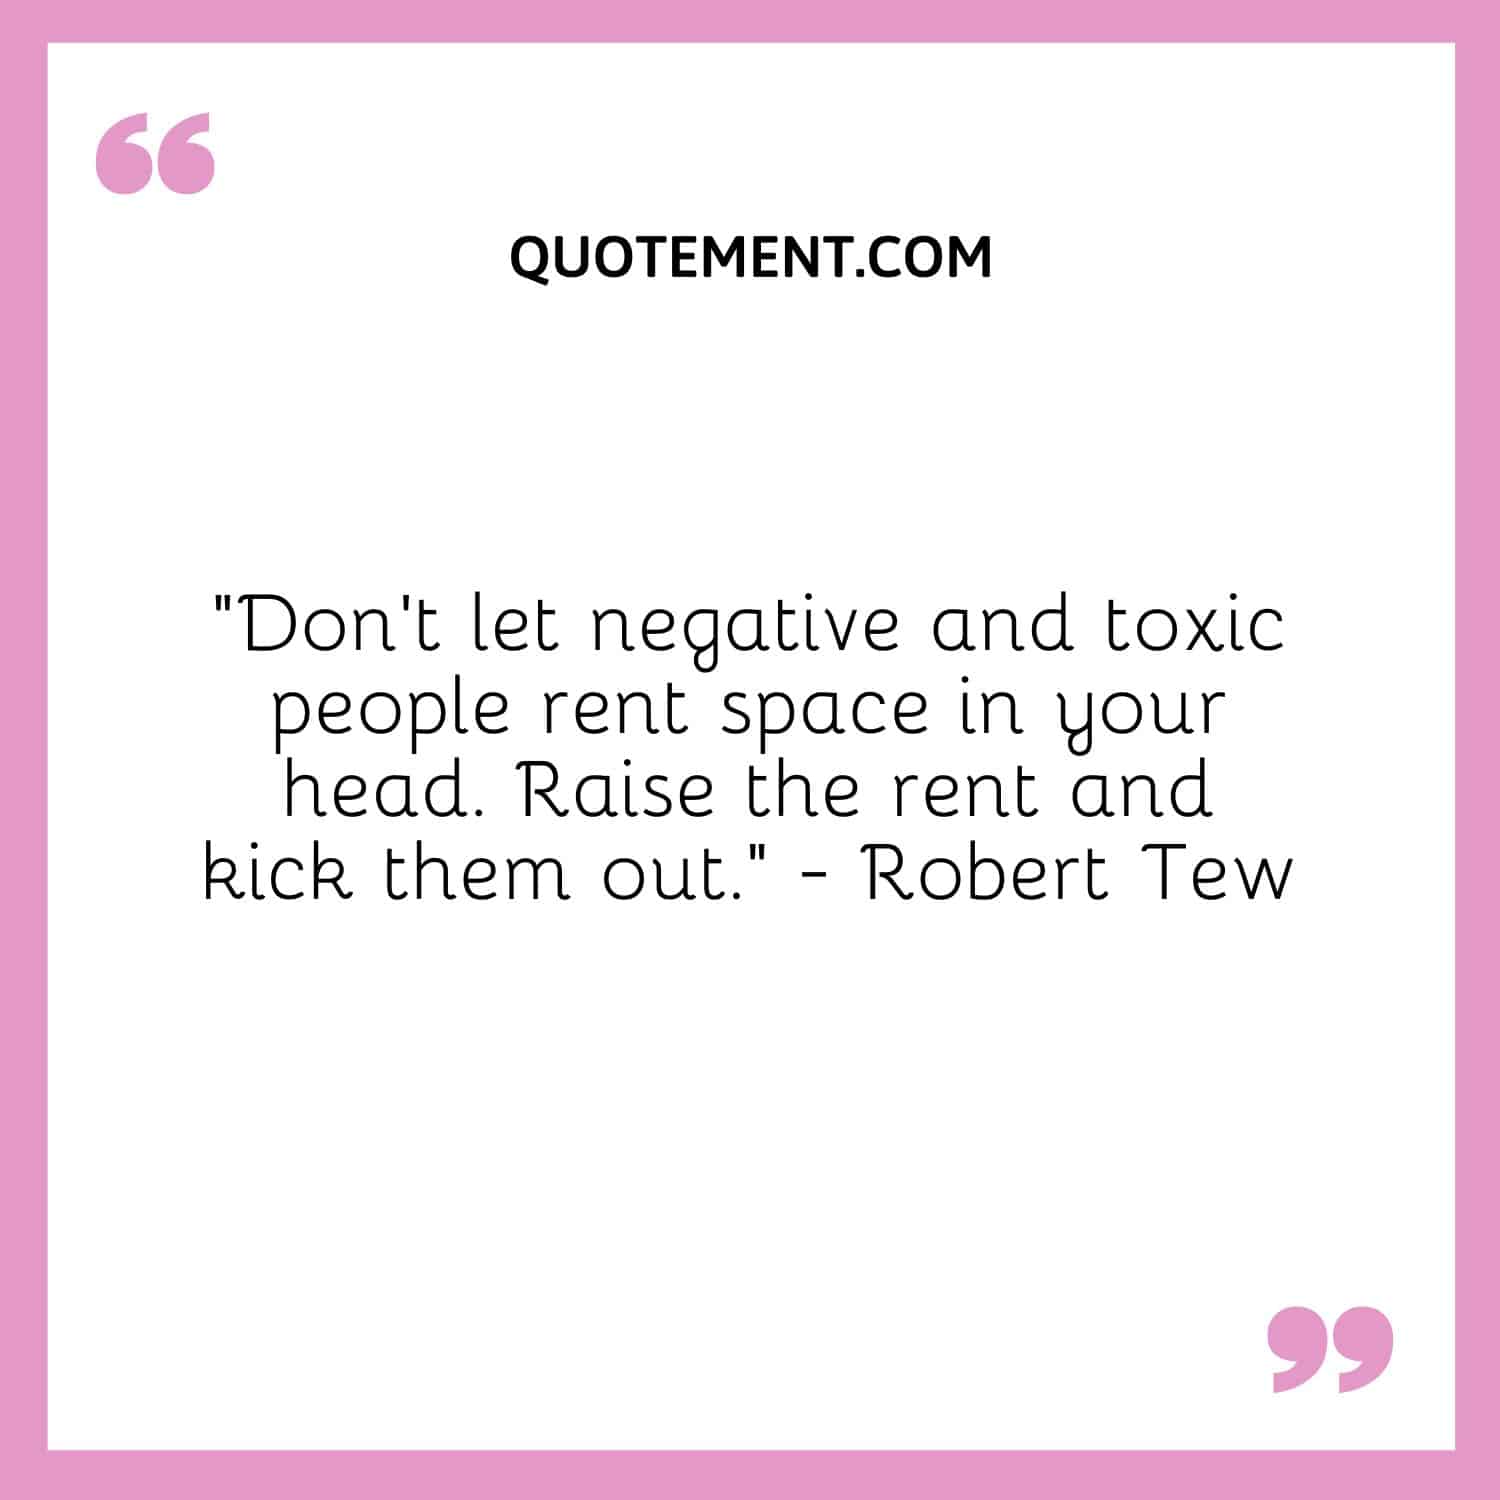 “Don't let negative and toxic people rent space in your head. Raise the rent and kick them out.” - Robert Tew